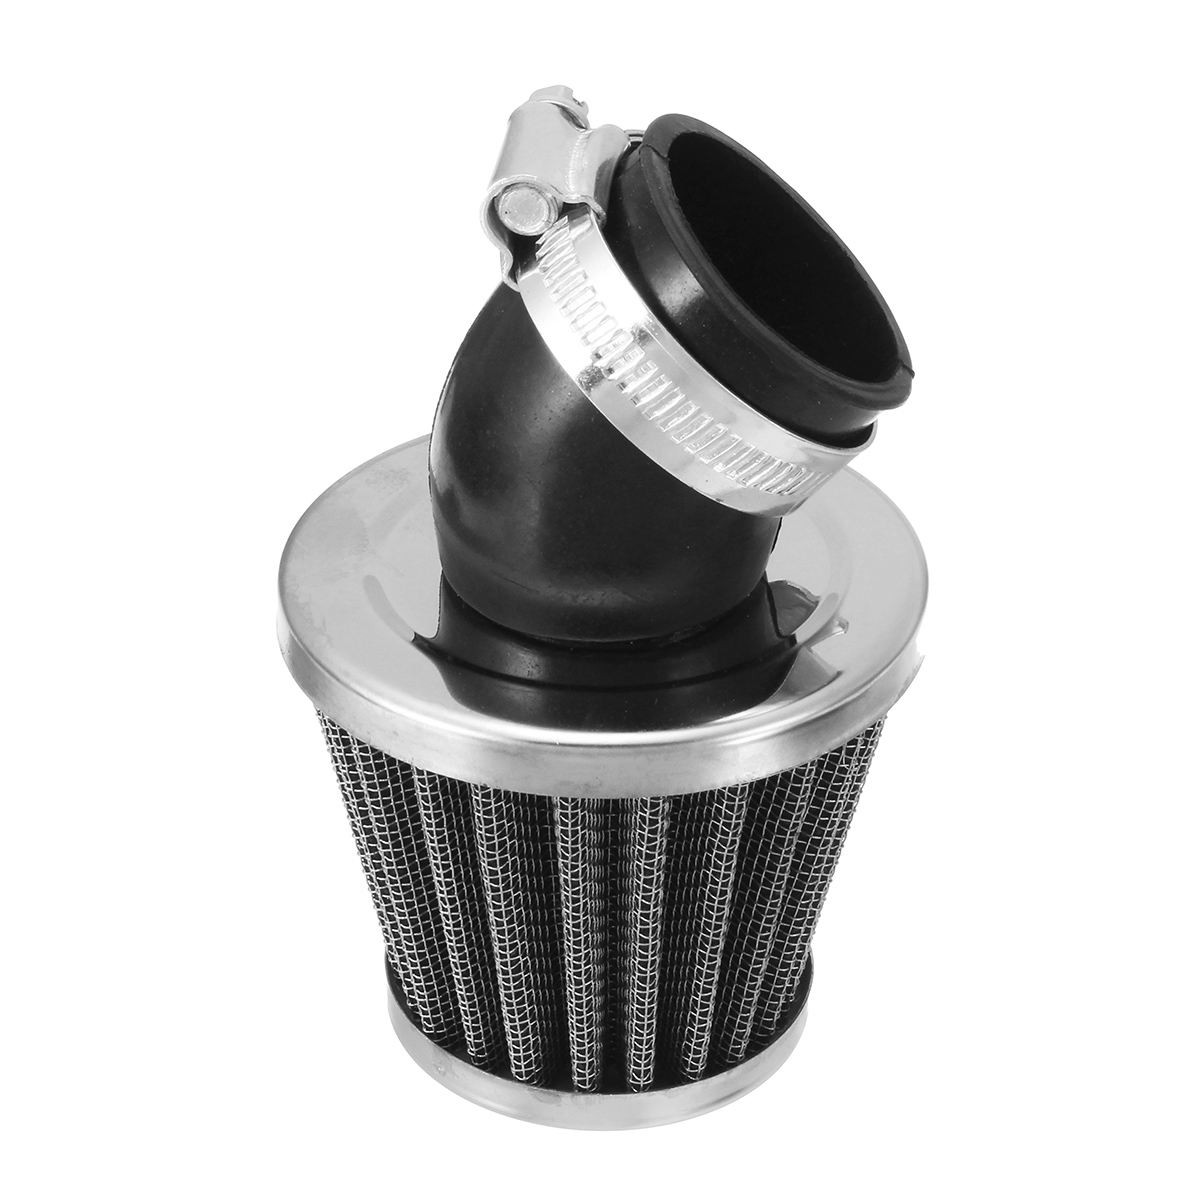 35-50MM-Air-Filter-Black-Fit-For-50-110-125-140CC-Pit-Dirt-Bike-Motorcycle-ATV-Scooter-1199679